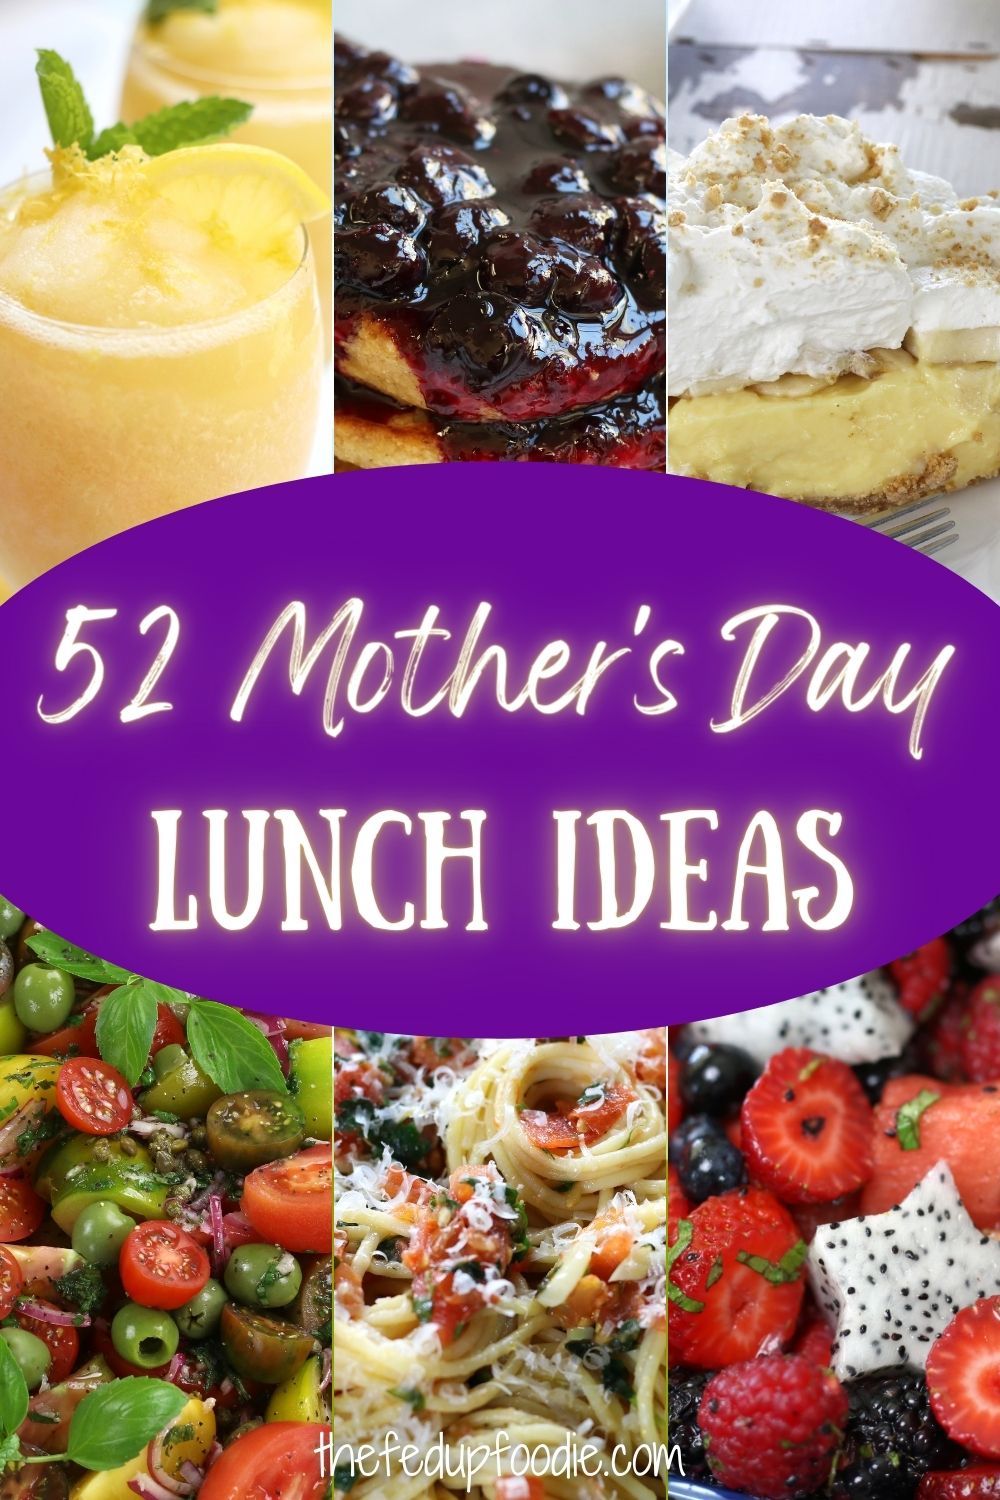 52 Mother's Day Lunch Ideas